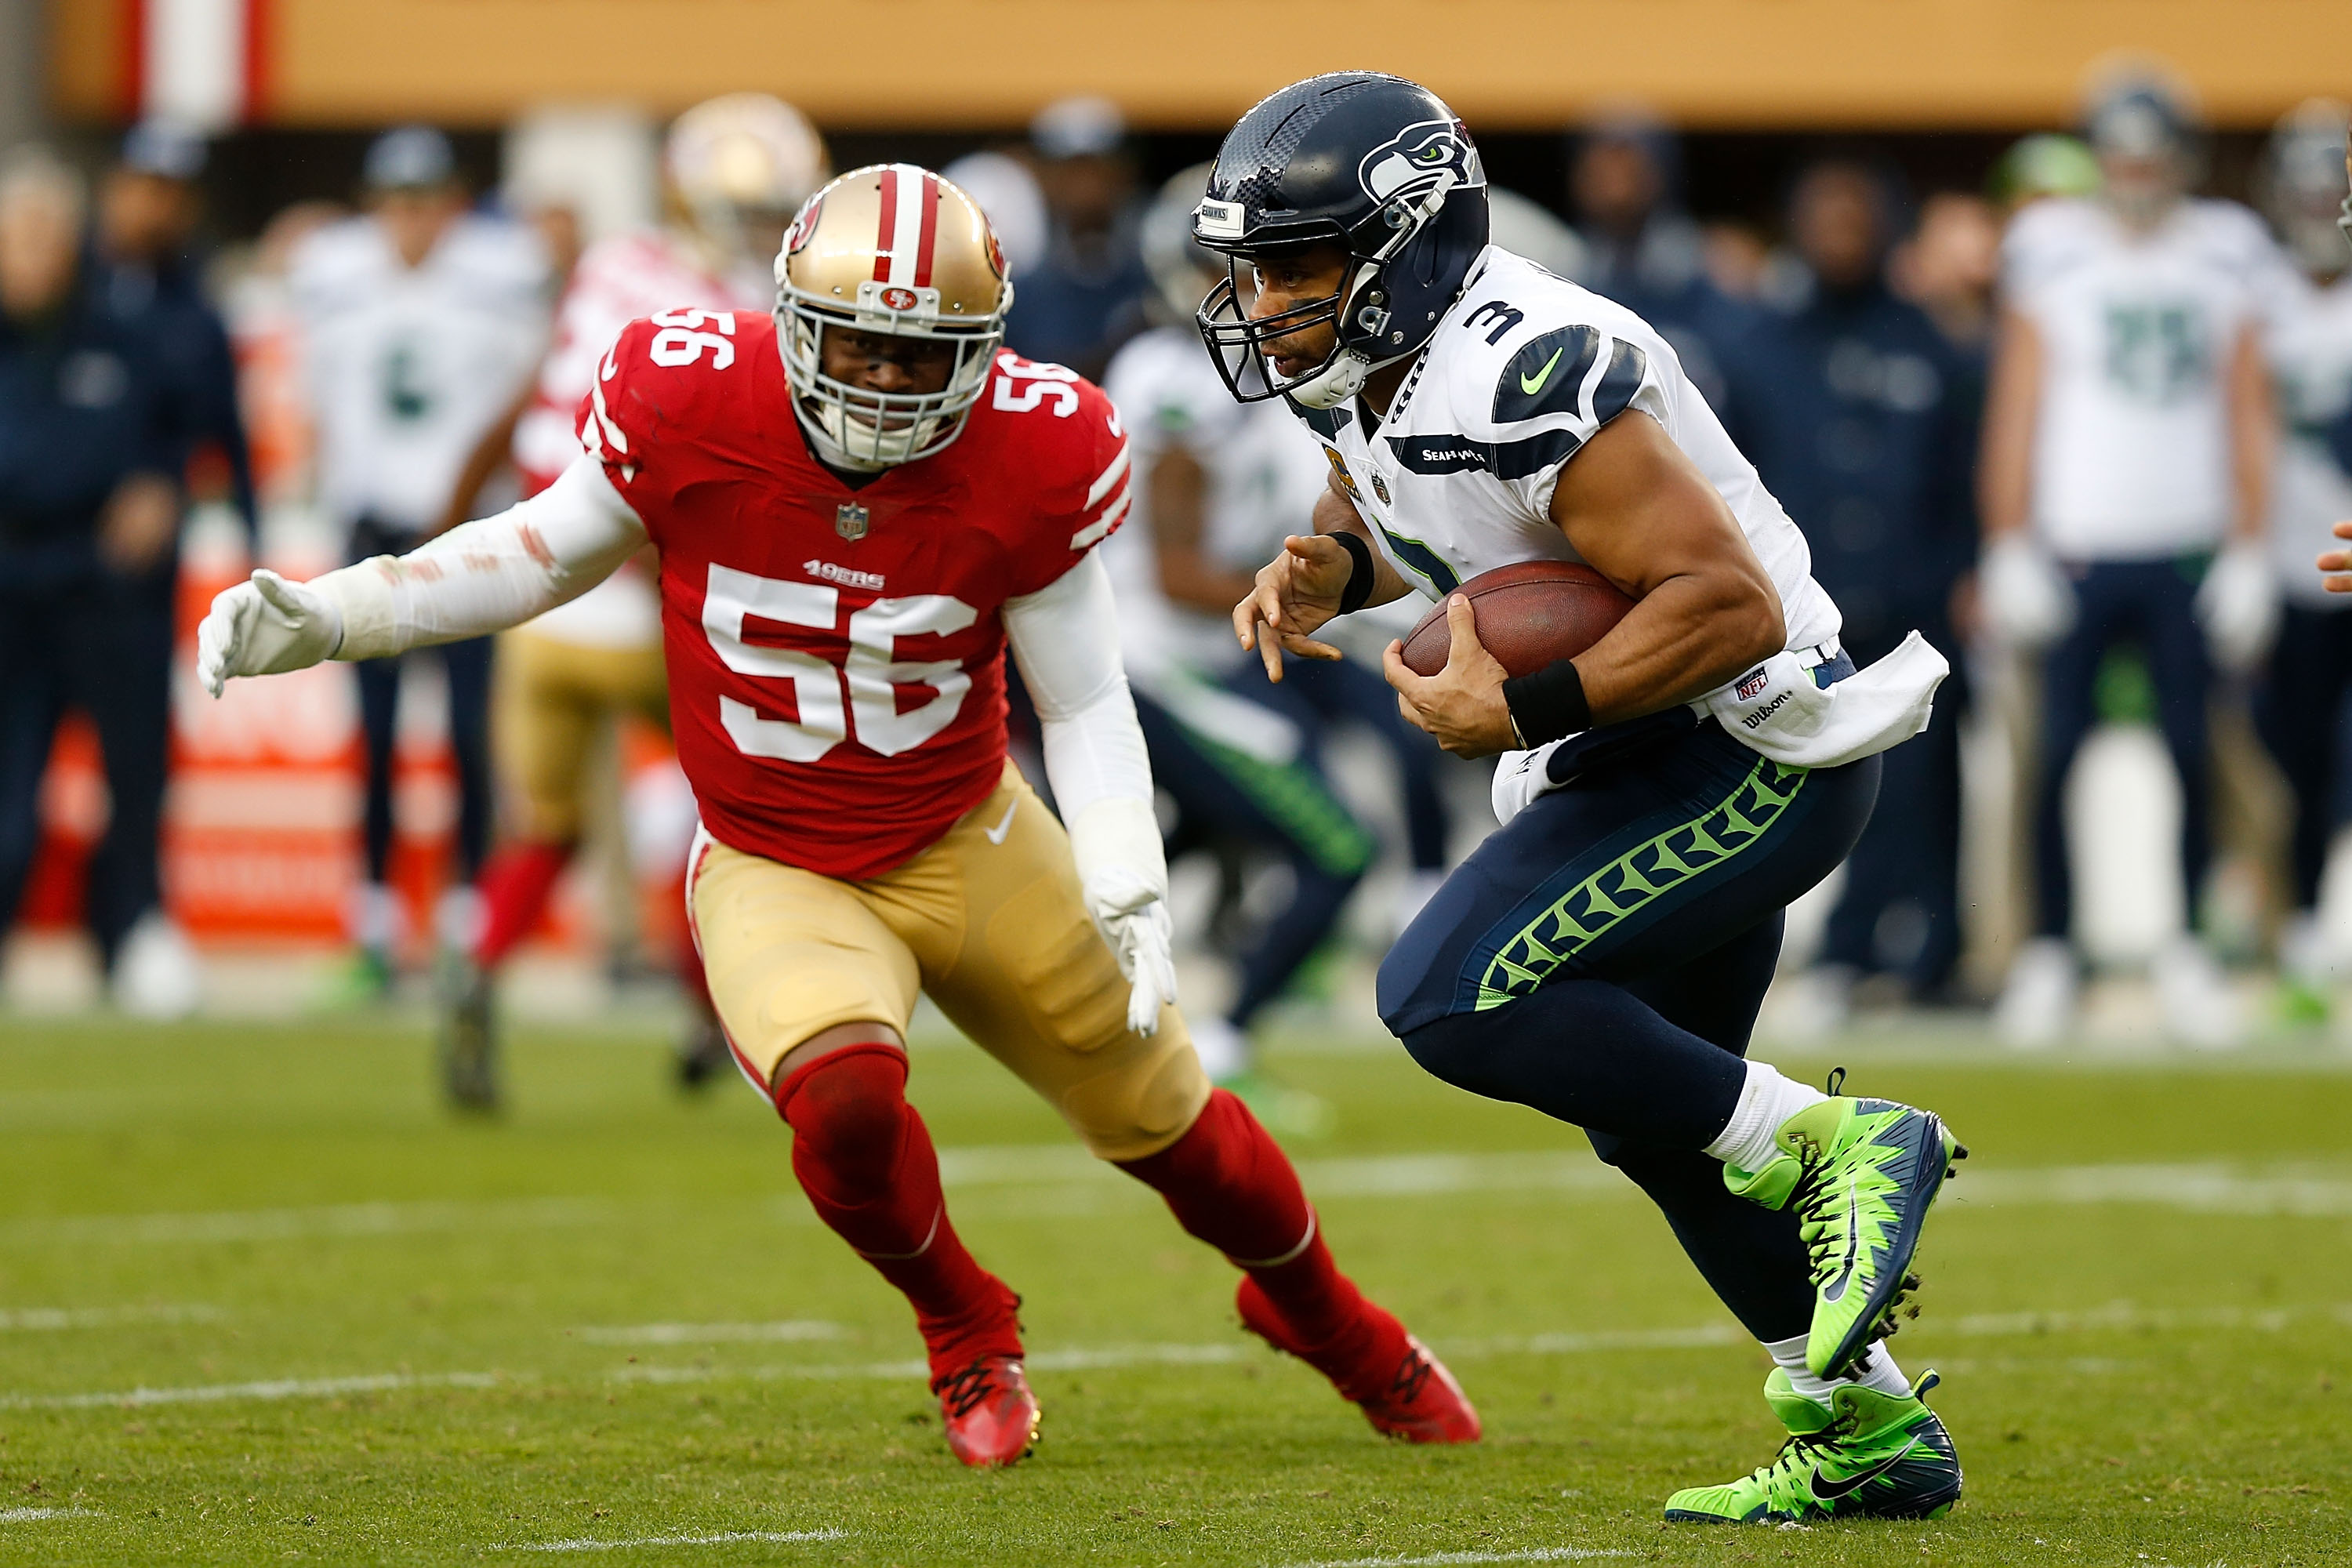 San Francisco 49ers: Foster's punishment highlights league's inconsistency